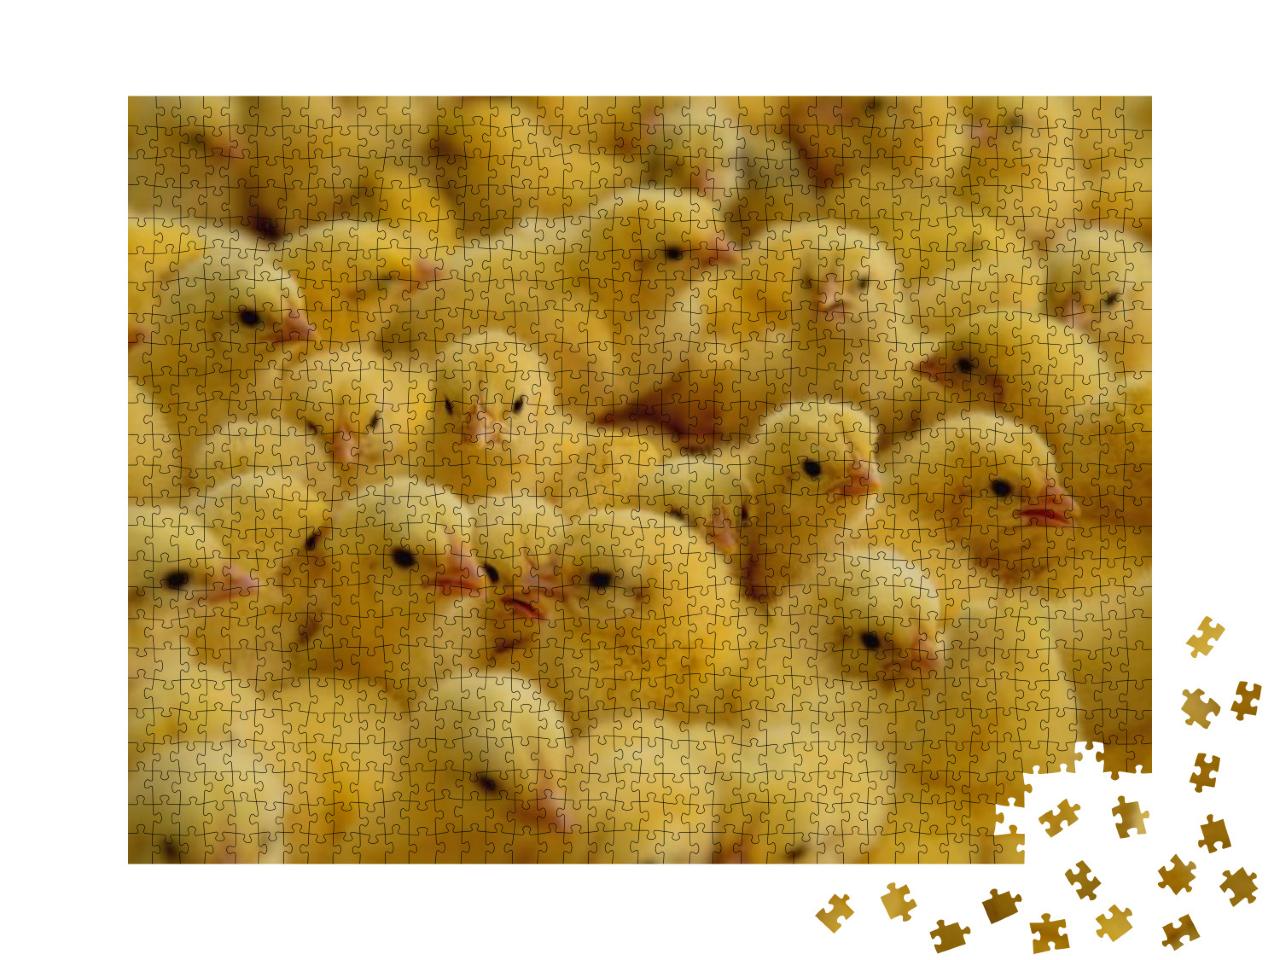 Lot of Little Chickens in a Farm... Jigsaw Puzzle with 1000 pieces